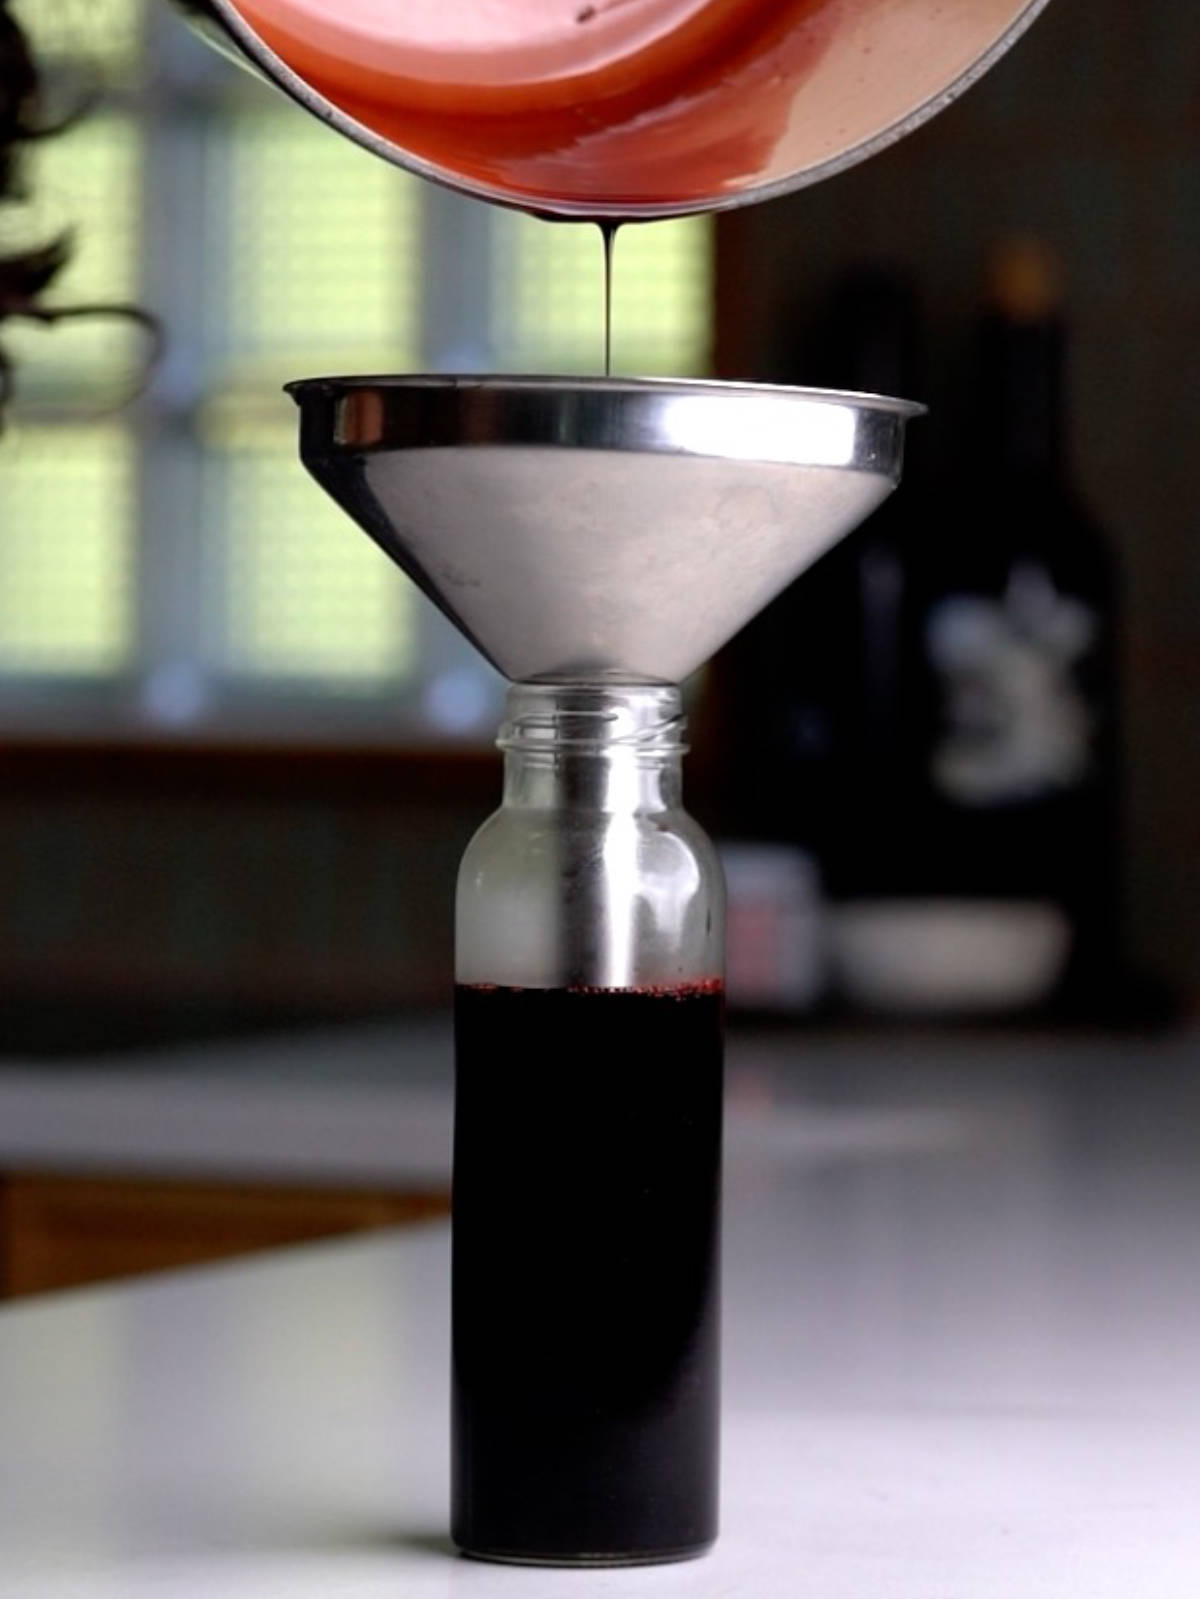 Pouring pomegranate molasses through a funnel into a glass container.